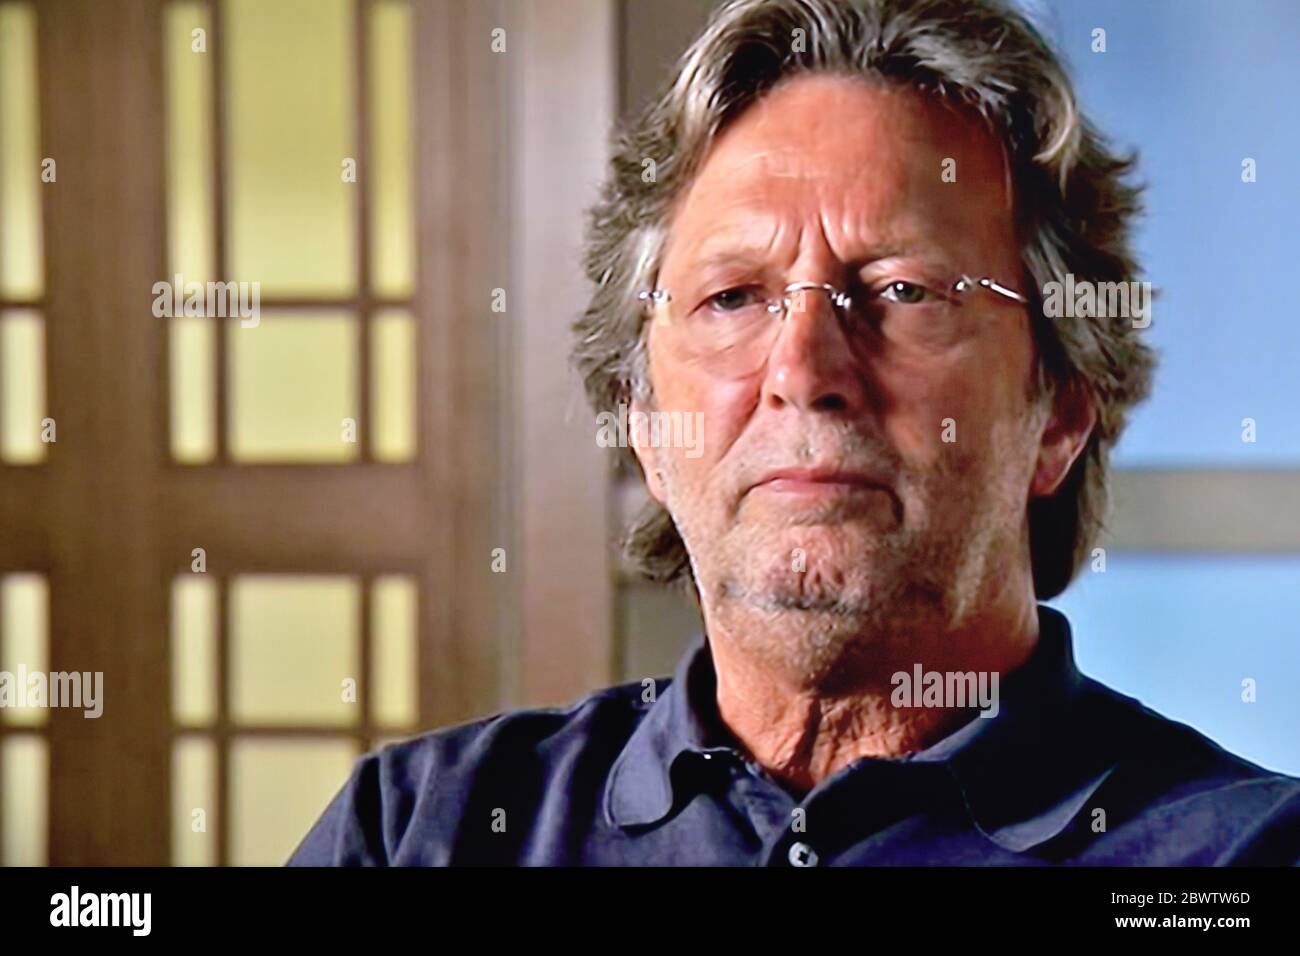 Eric Clapton chitarrista rock and blues inglese, Foto Stock